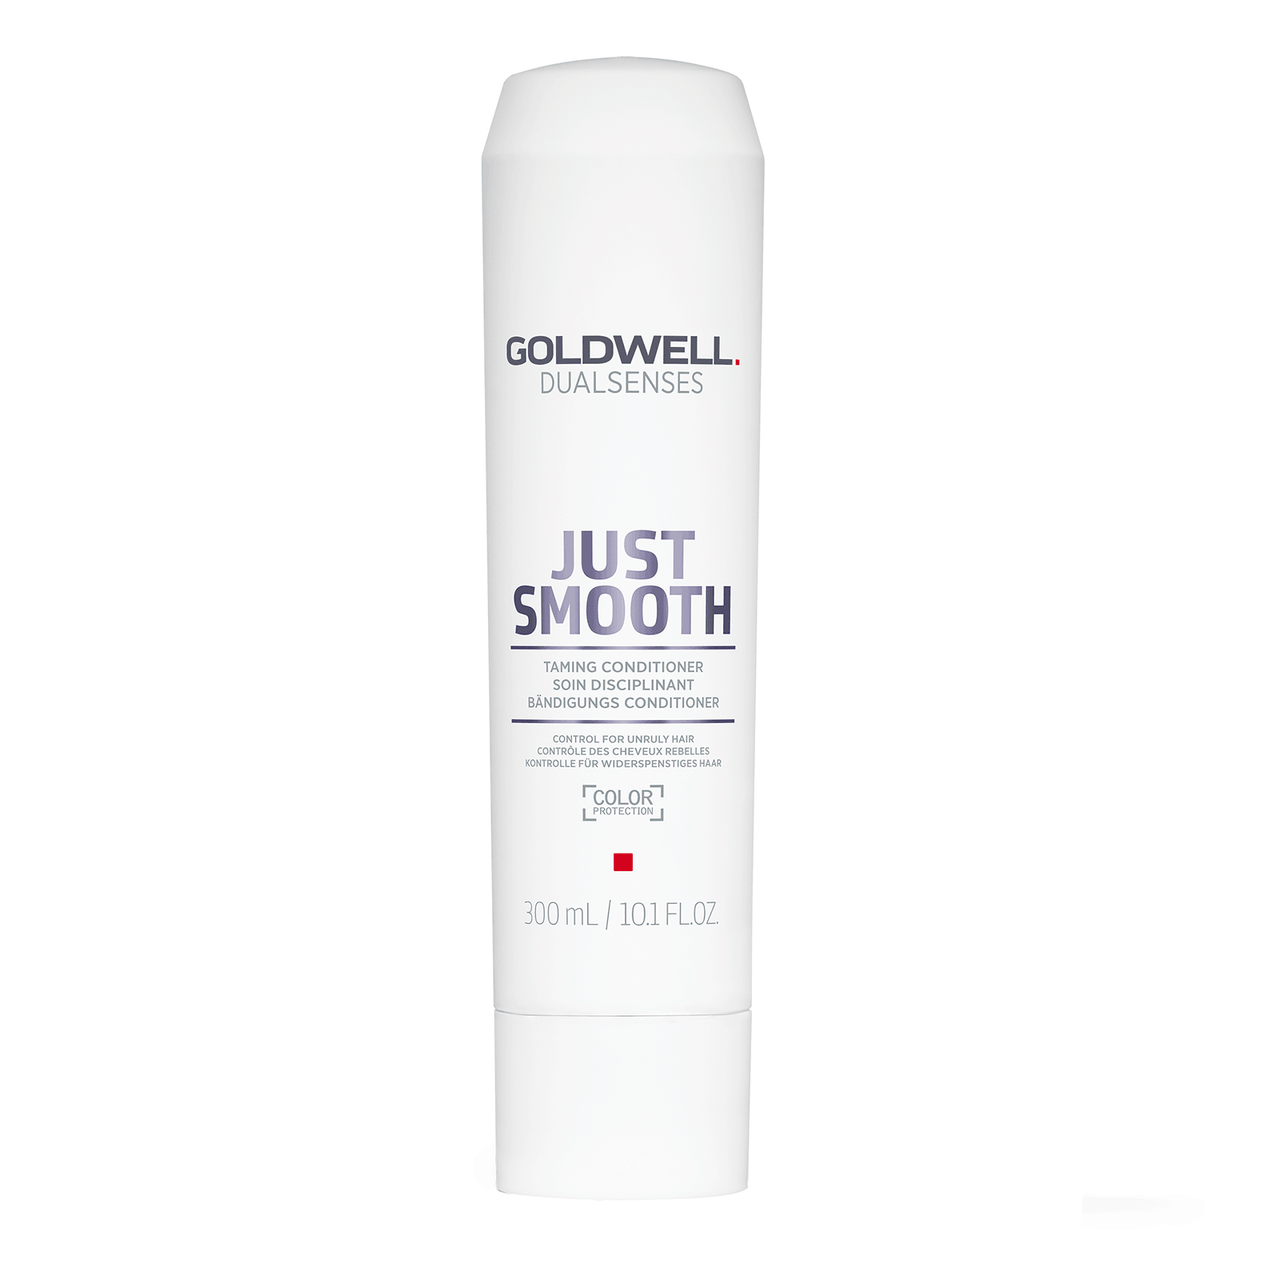 Goldwell  Dualsenses Just Smooth Taming Conditioner 10.1 fl oz